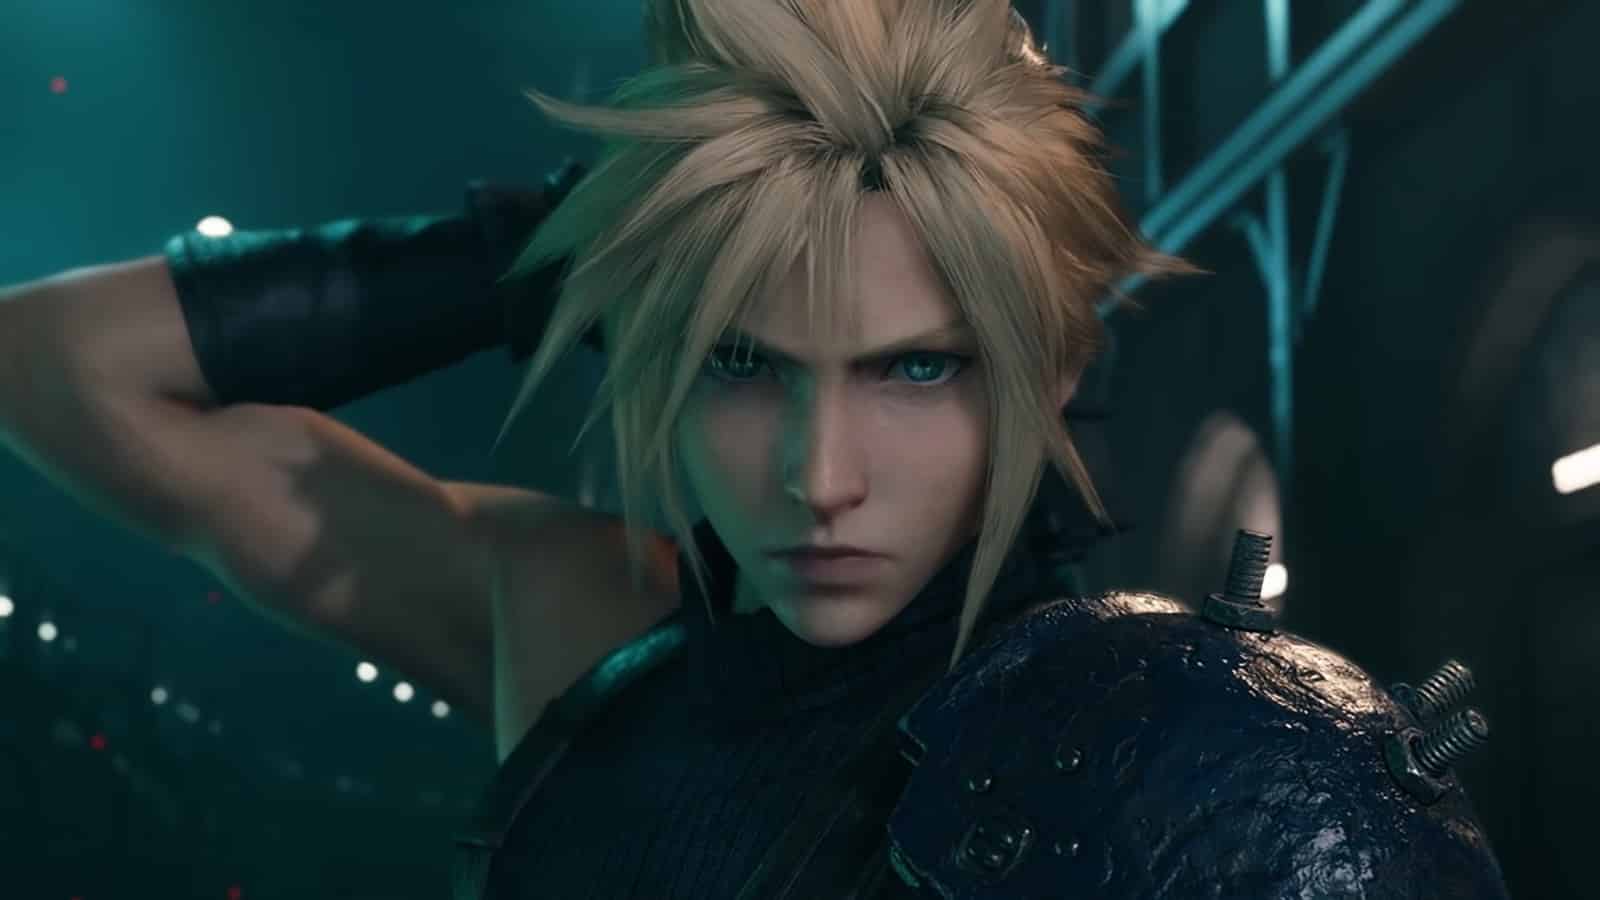 ff7 remake steam release may come soon